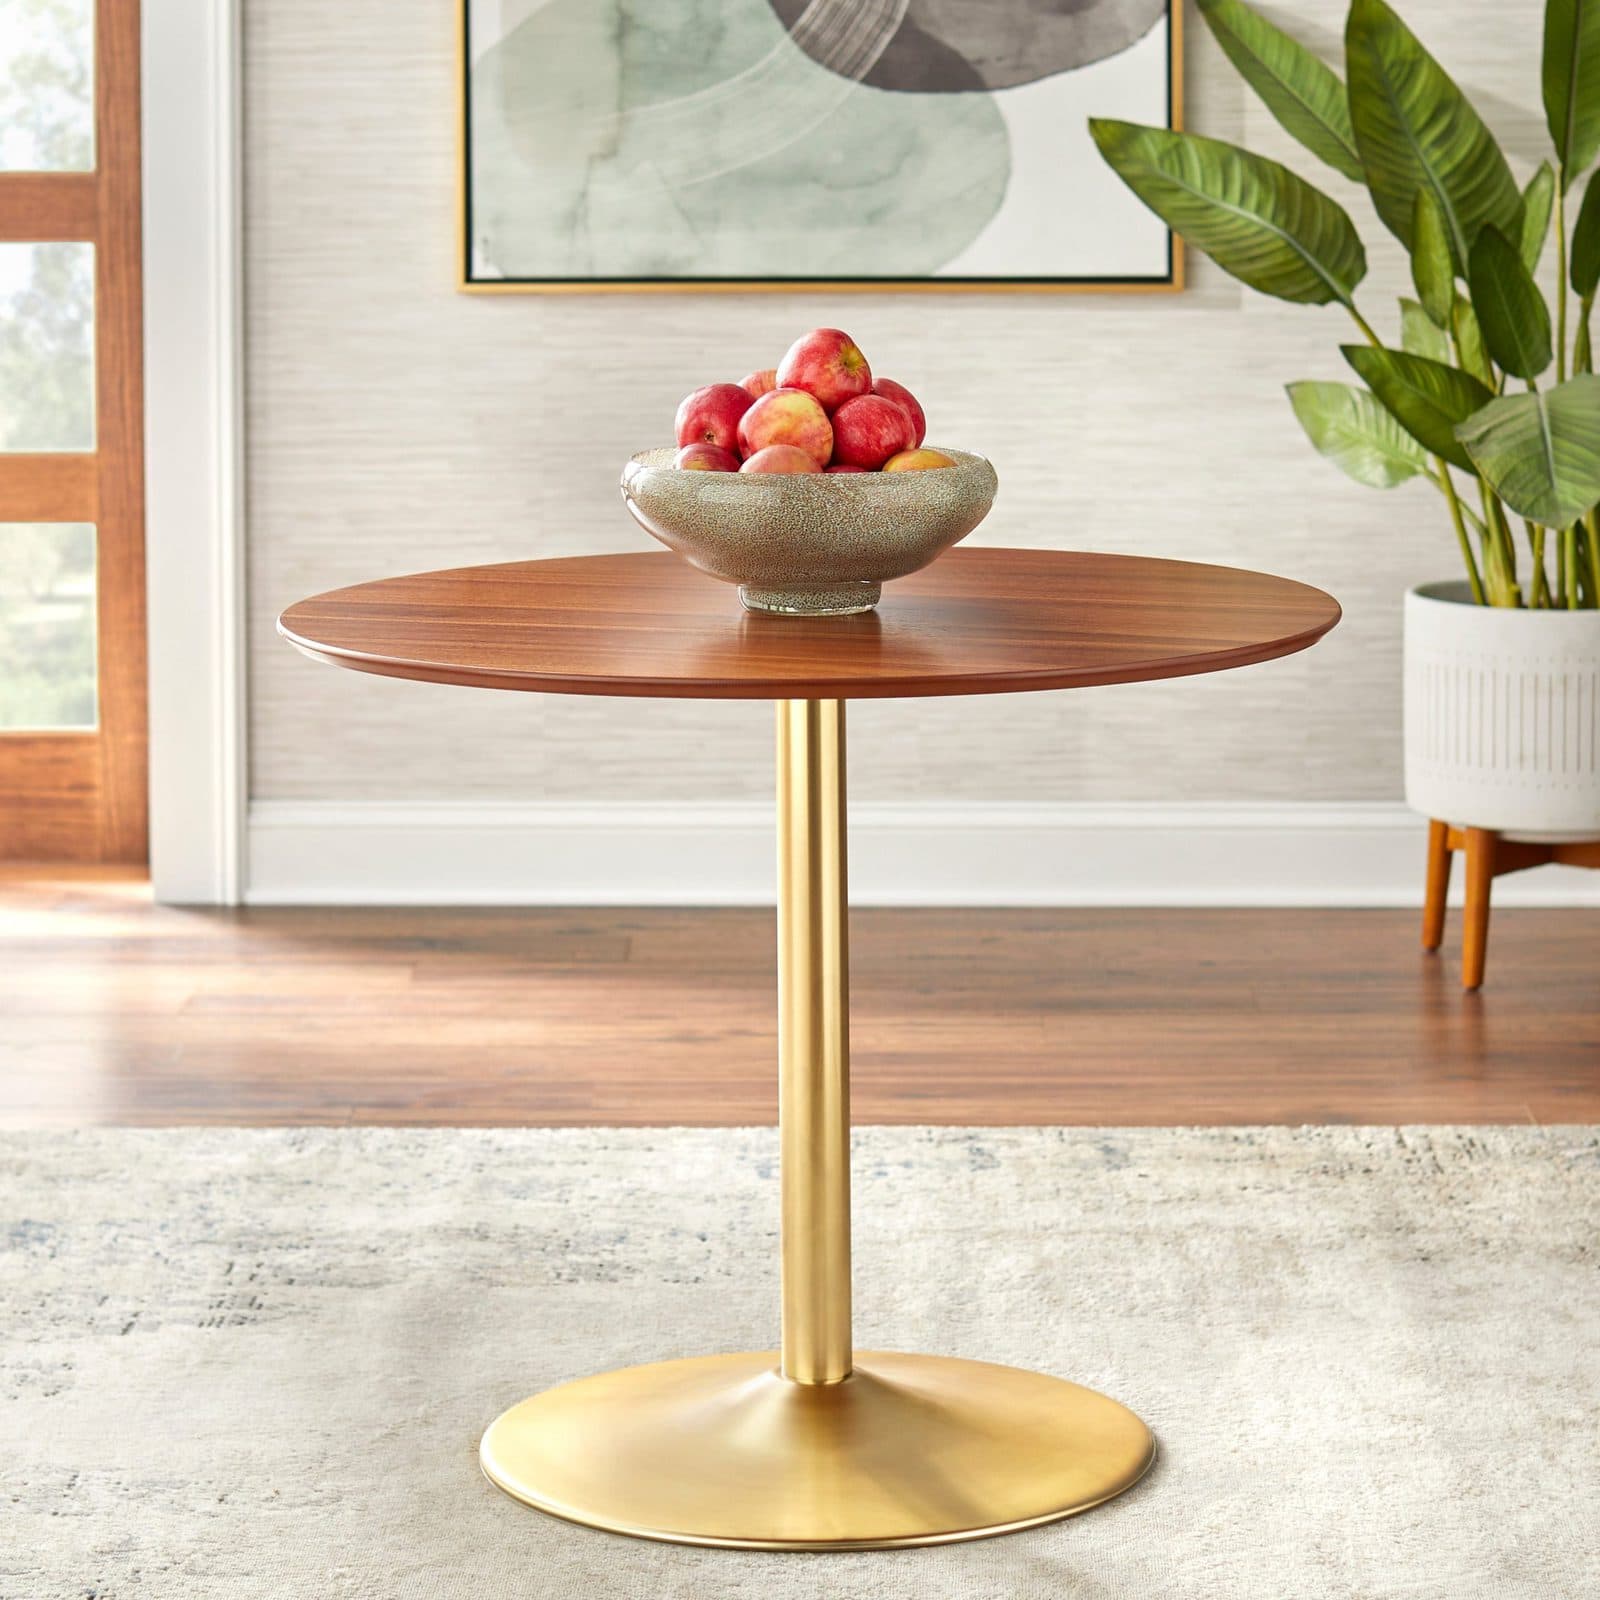 Update Your Dining Room Table